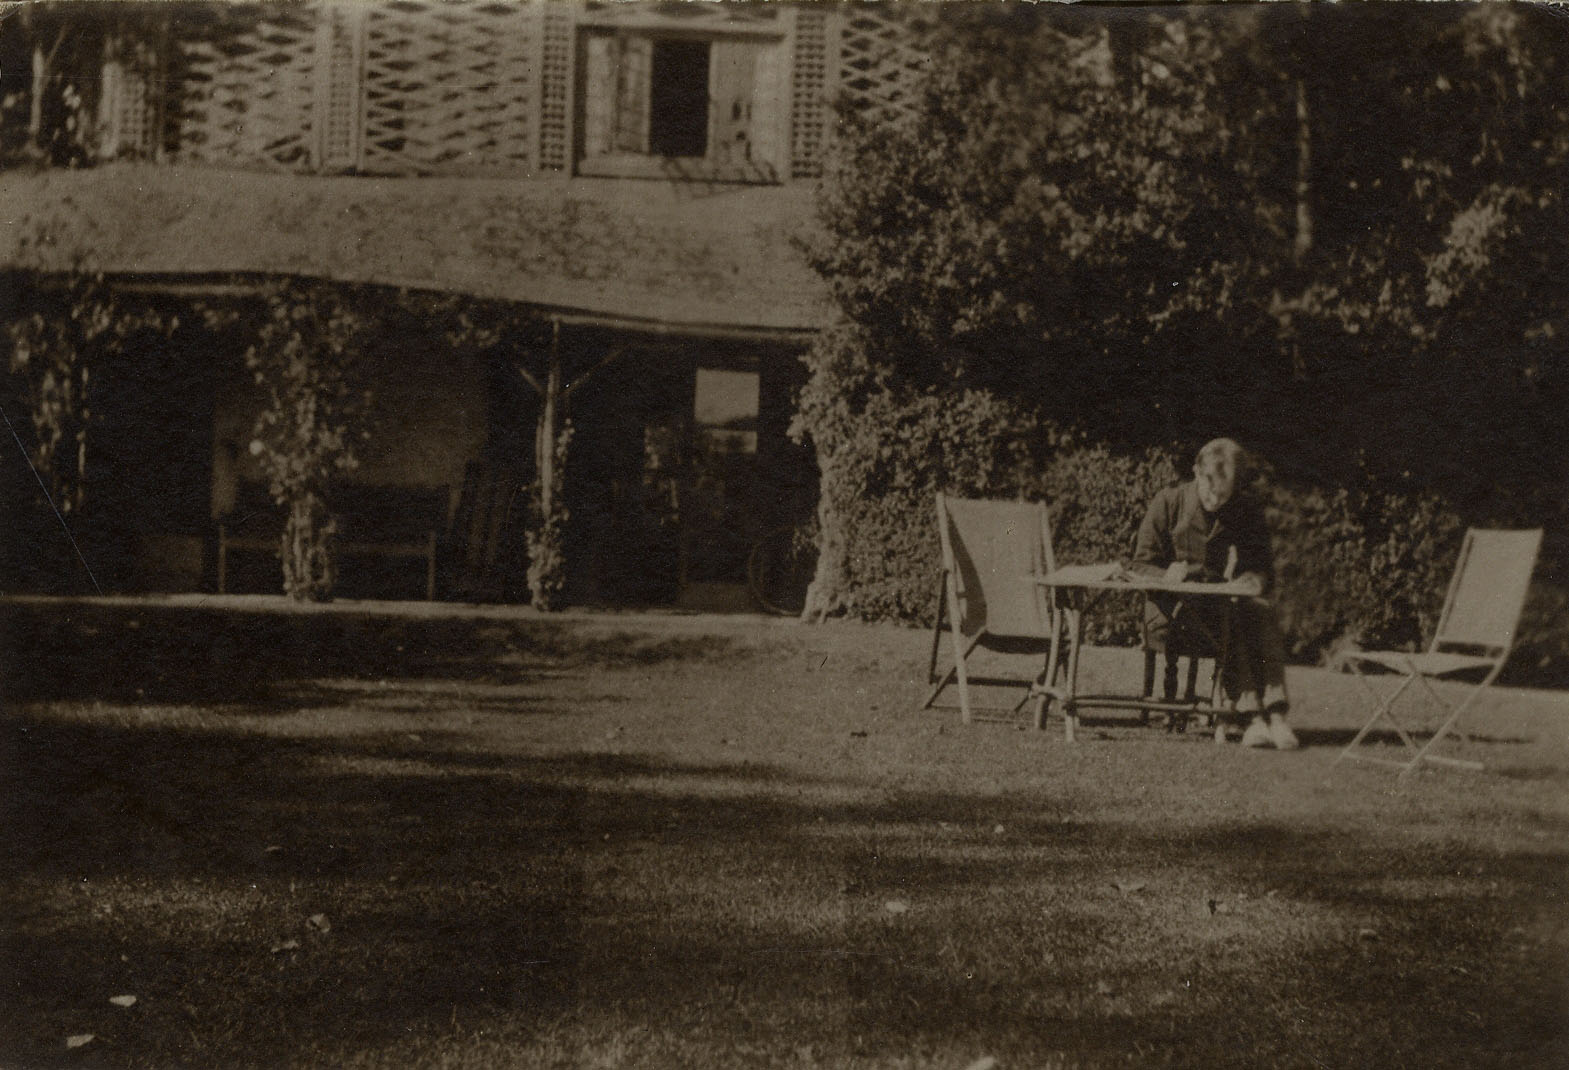 •	Rupert Brooke at the Old Vicarage Summer 1911, by Miss Linder. Archive Centre, King’s College, Cambridge. RCB/Ph/128.